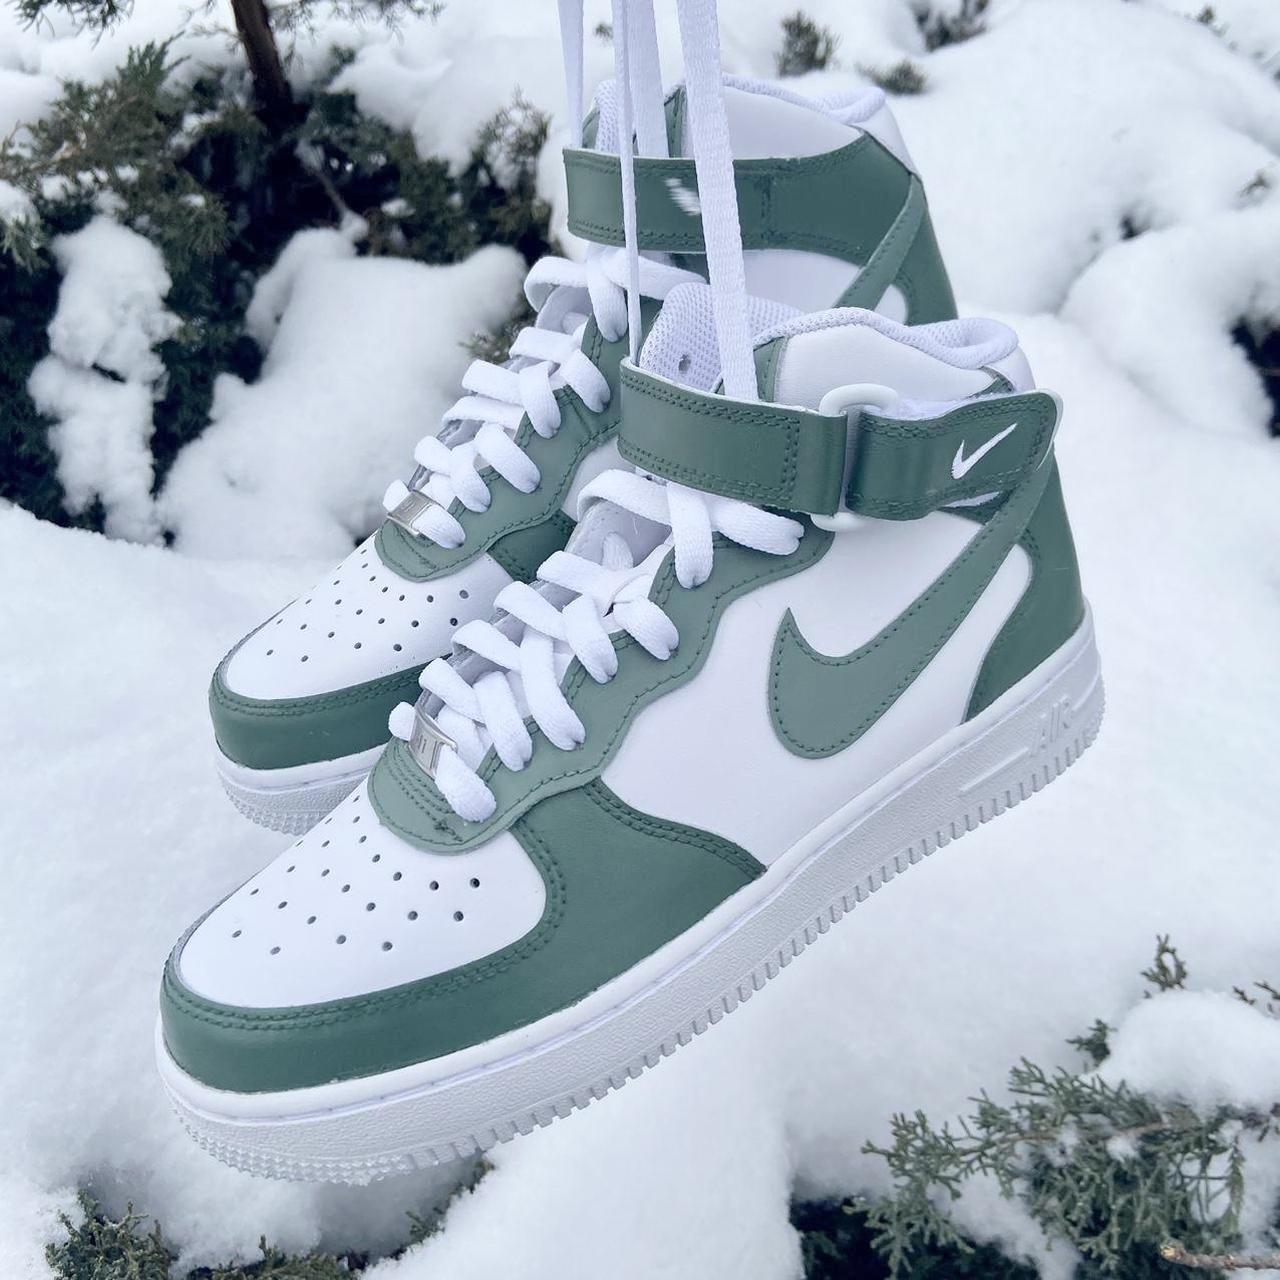 Custom Women's Nike Air Force 1 Sage Low All White Shoes 